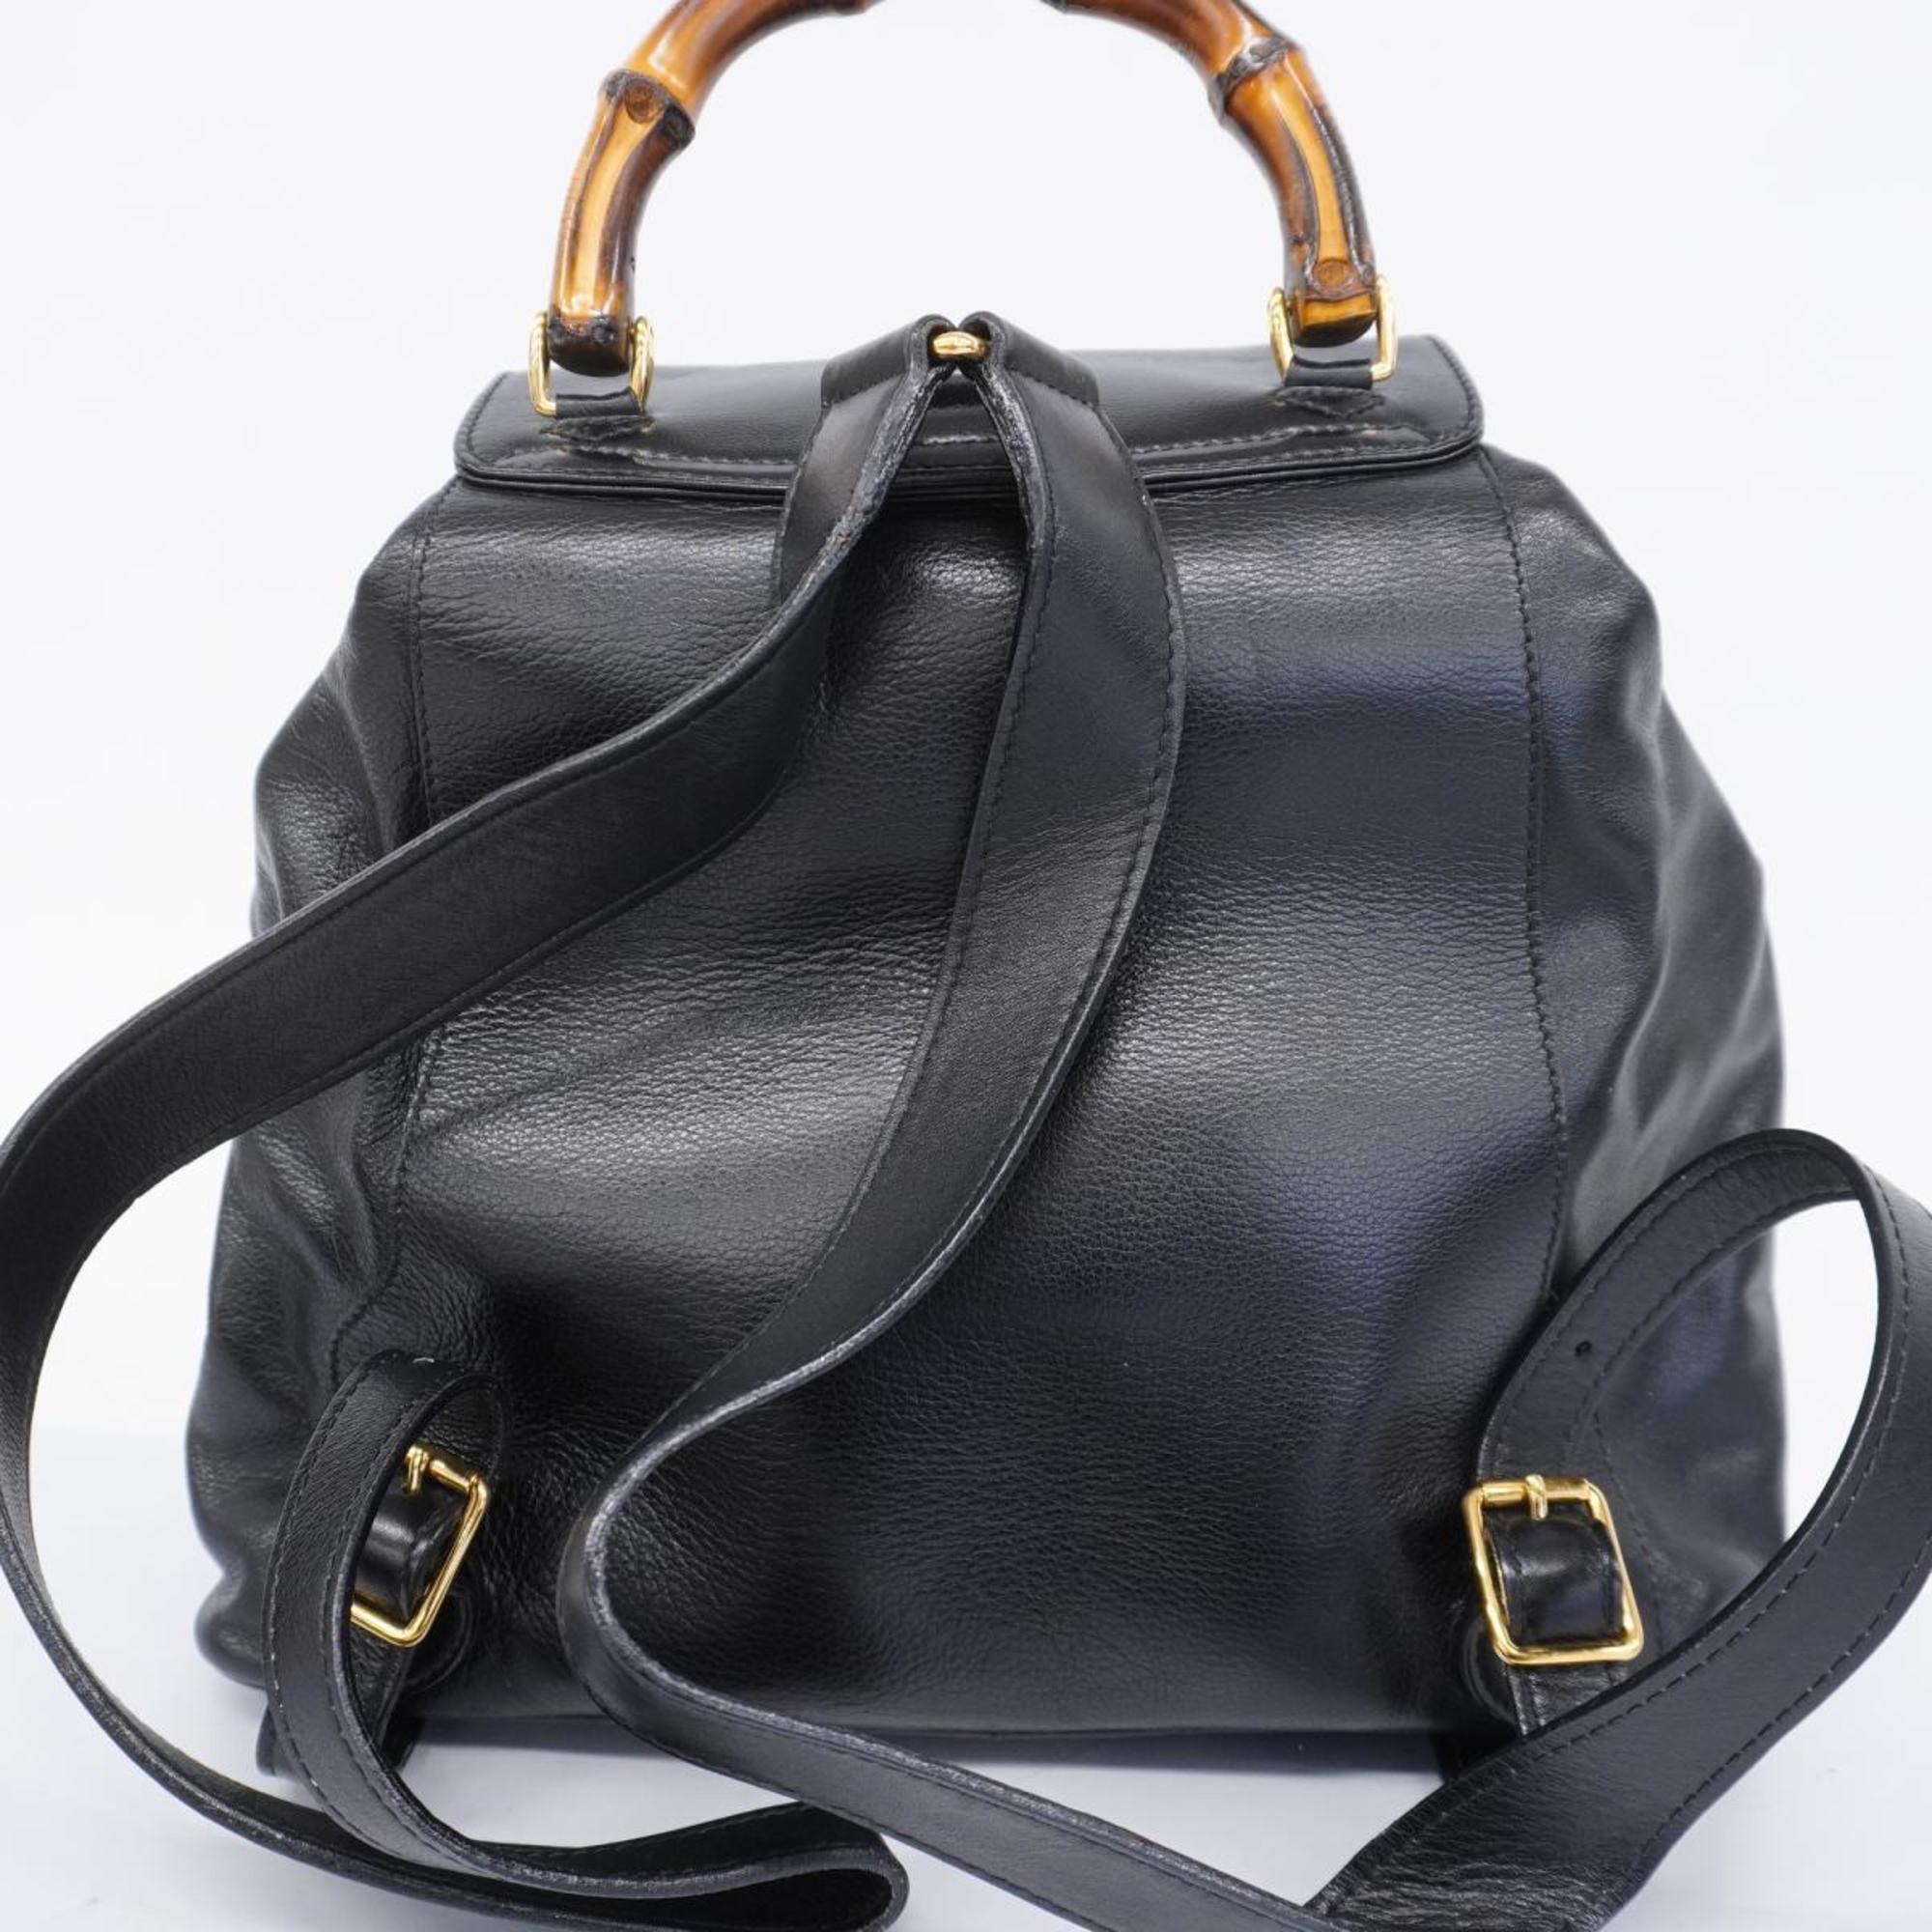 Gucci Backpack Bamboo 003 58 0016 Leather Black Women's